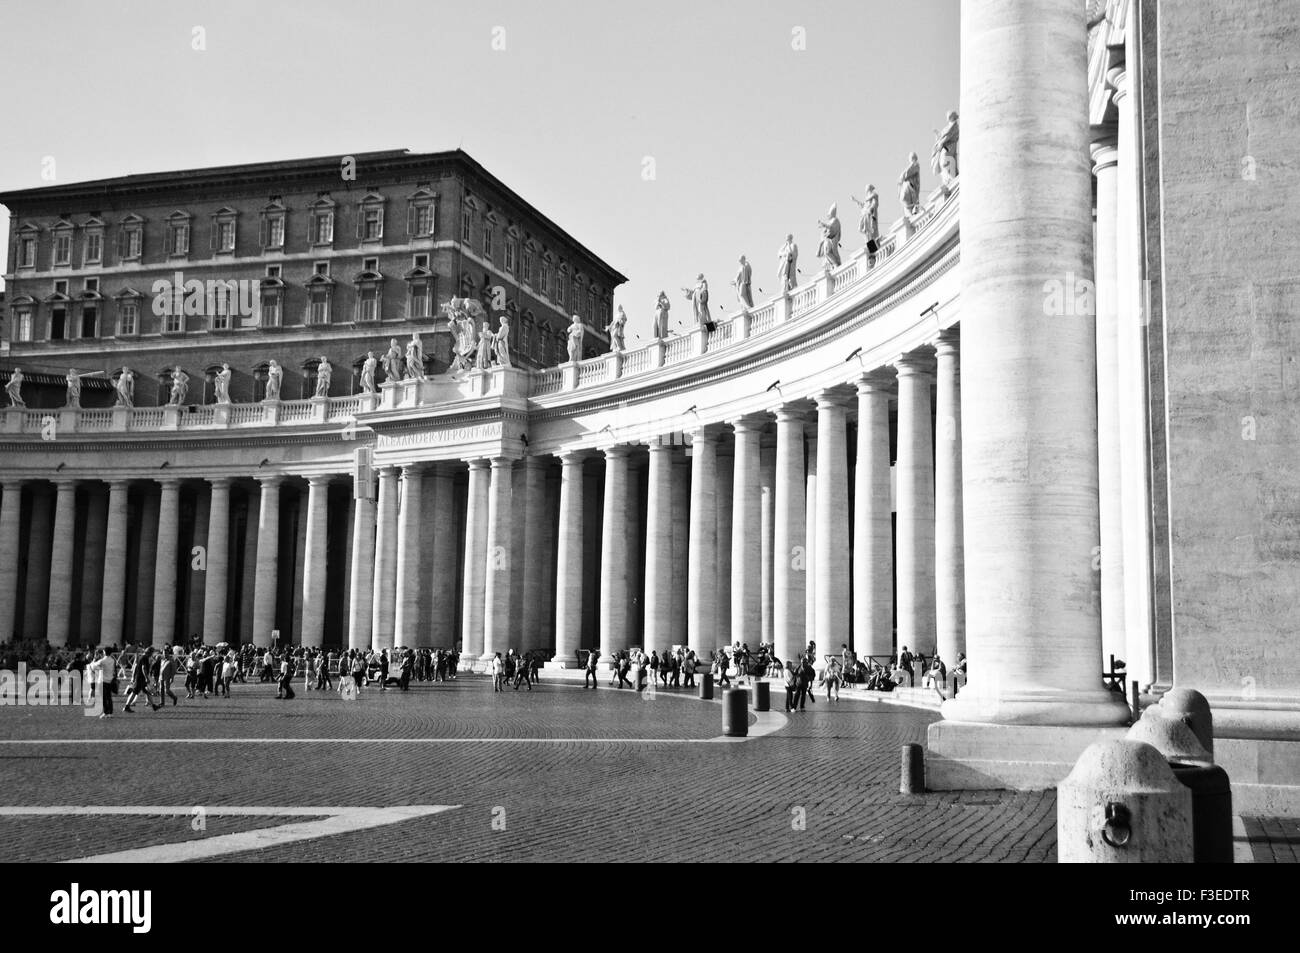 St. Peter's square Stock Photo